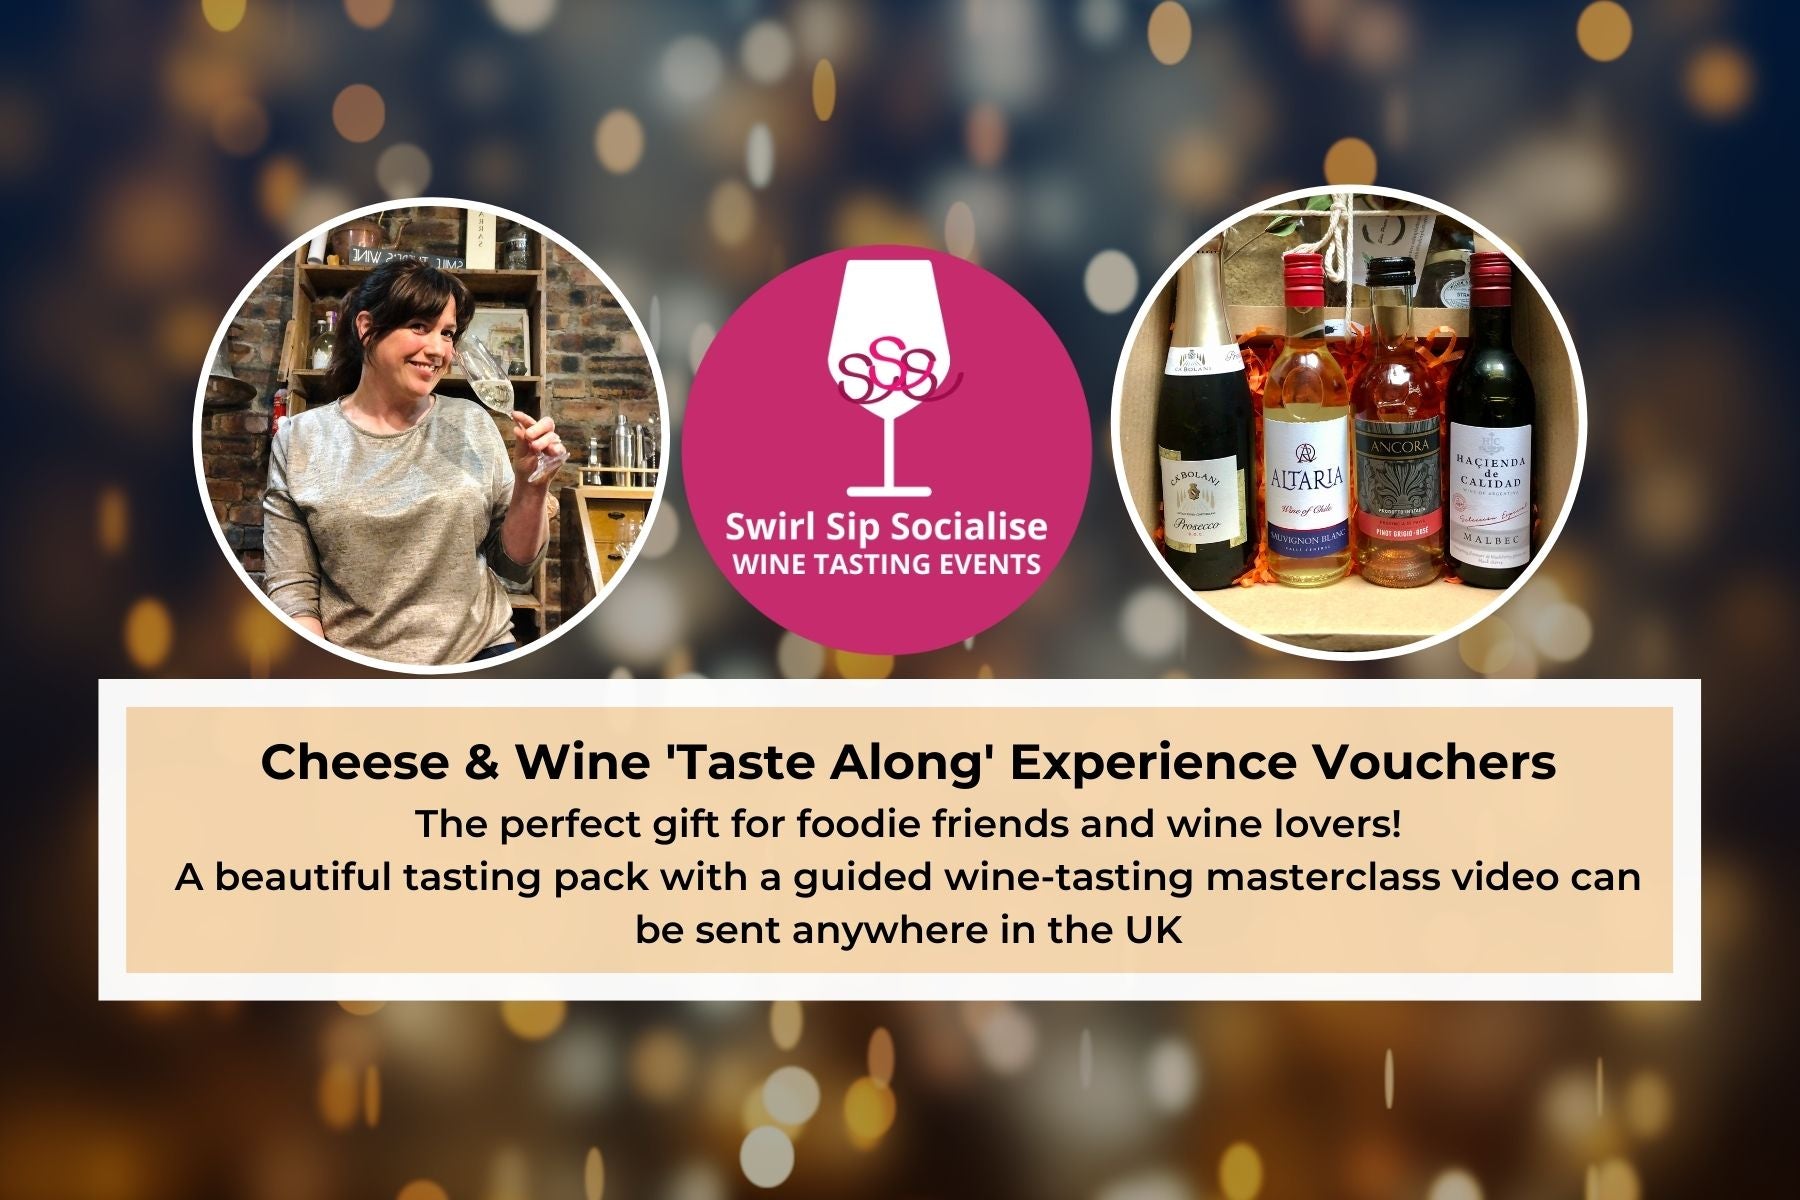 Gift Voucher: A 'Taste Along' Wine and Cheese Masterclass